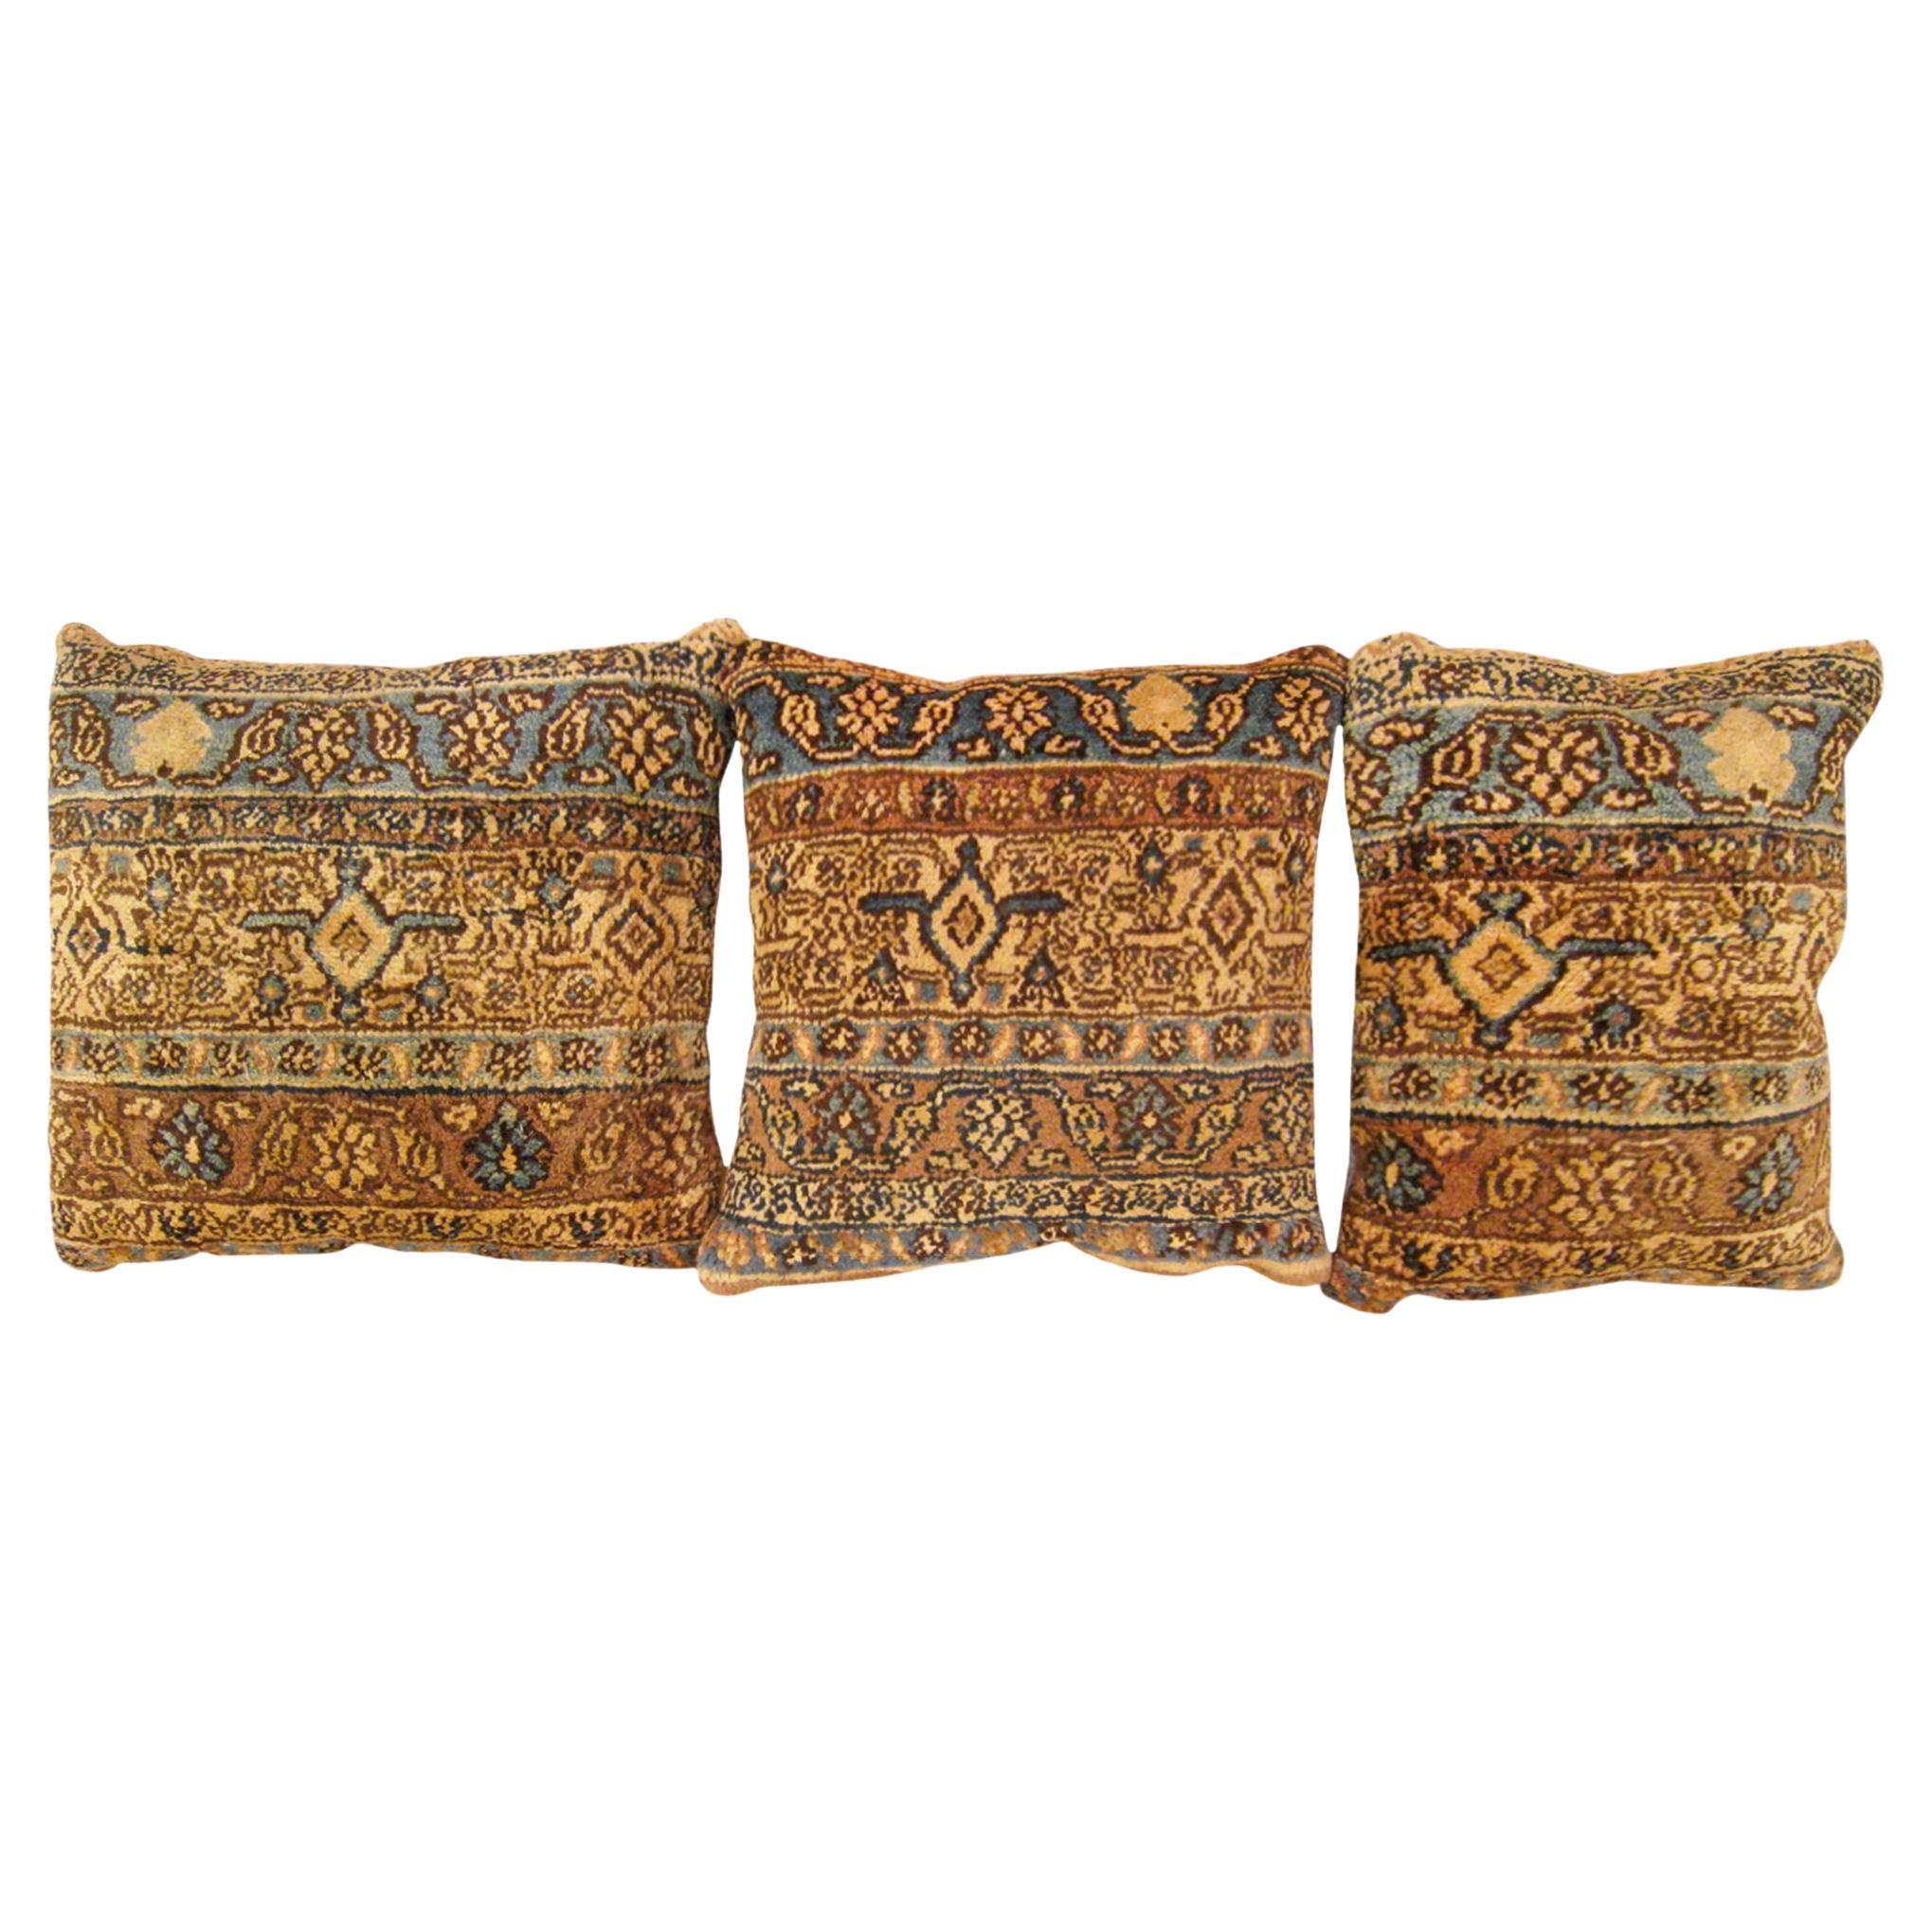 Set of Decorative Vintage Pillows with Geometric Abstracts Motif For Sale